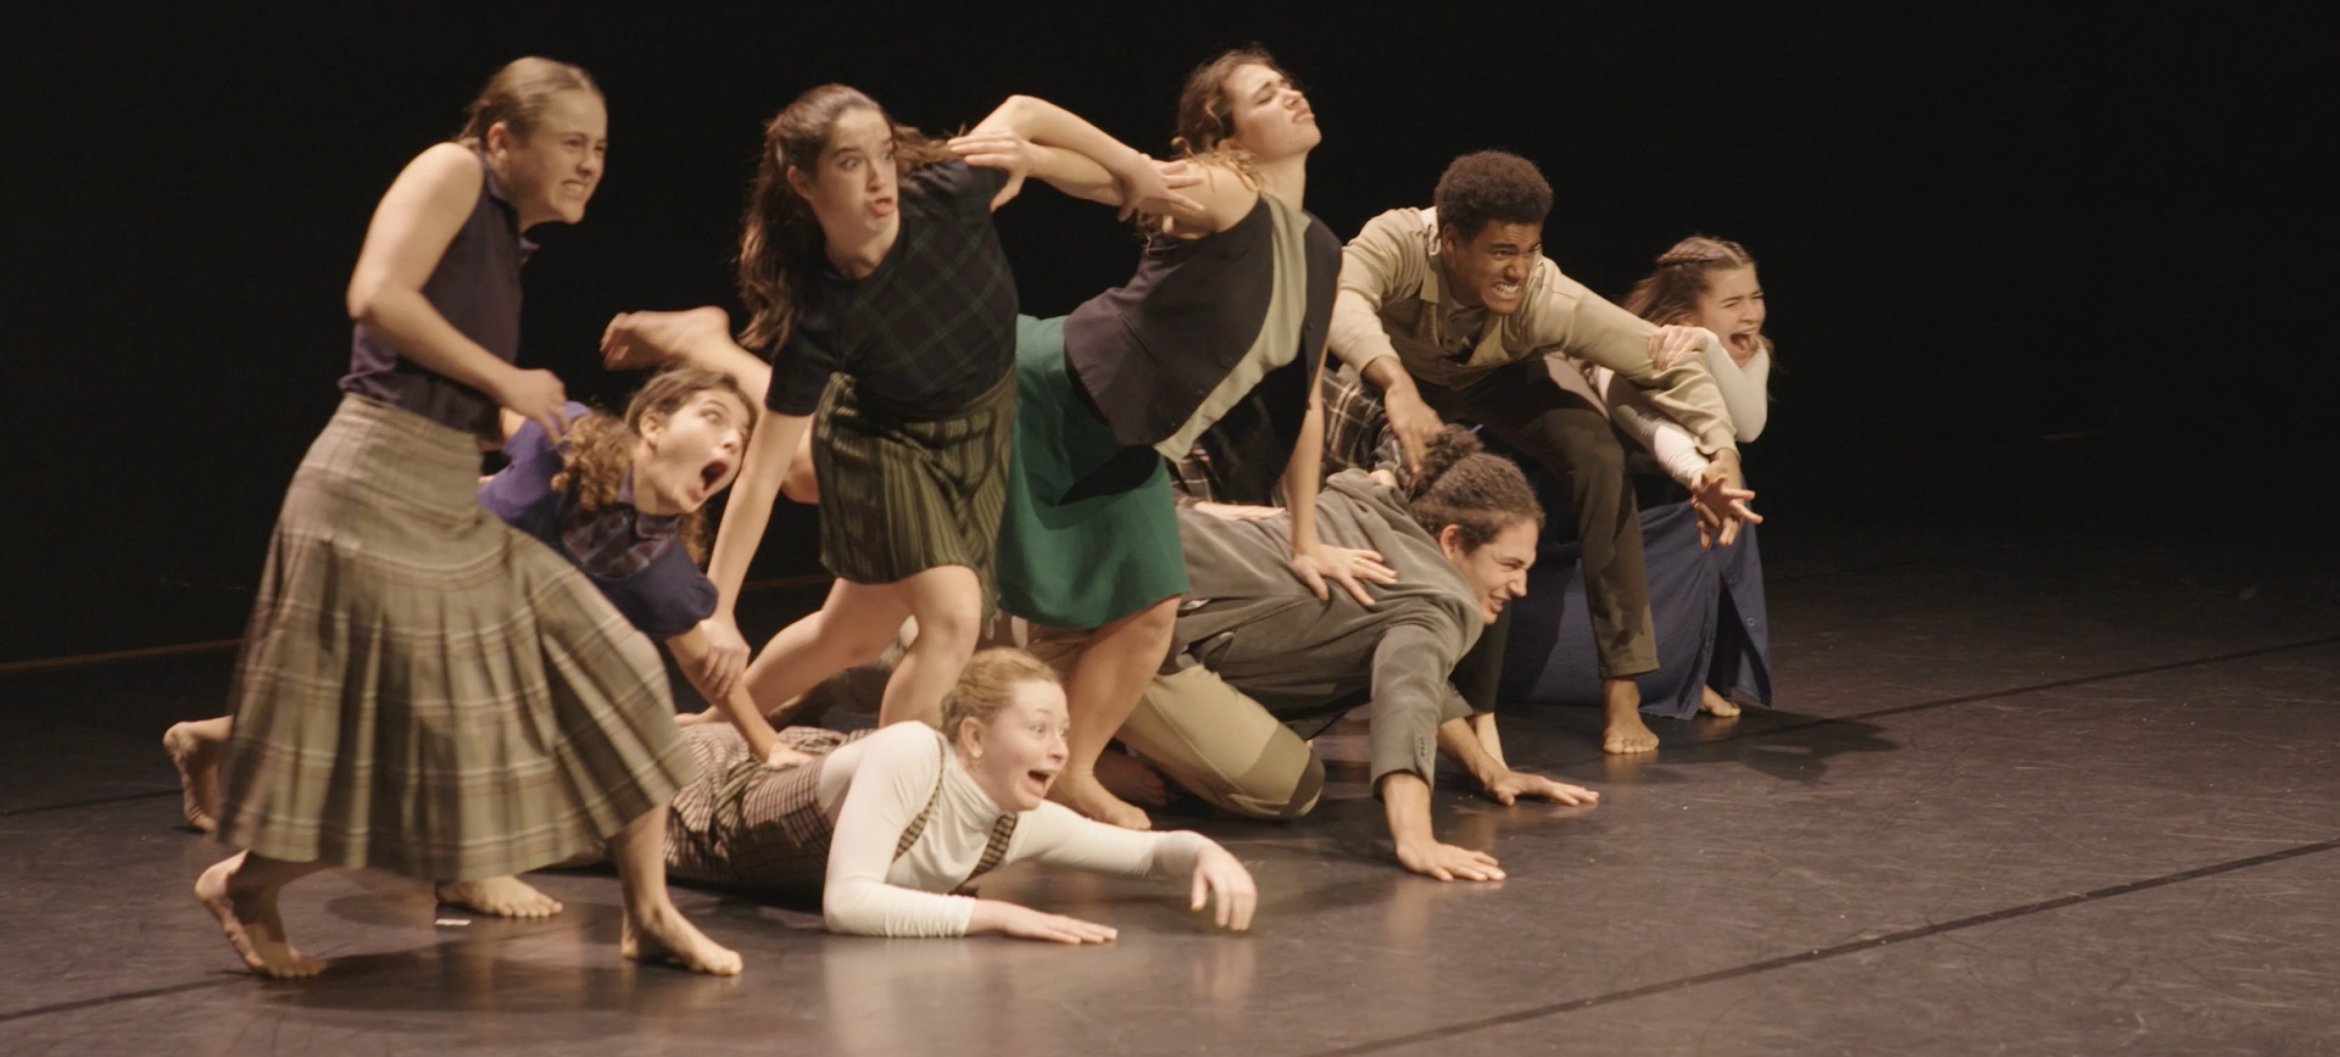 ChoCo: dance and music students create breathtaking show